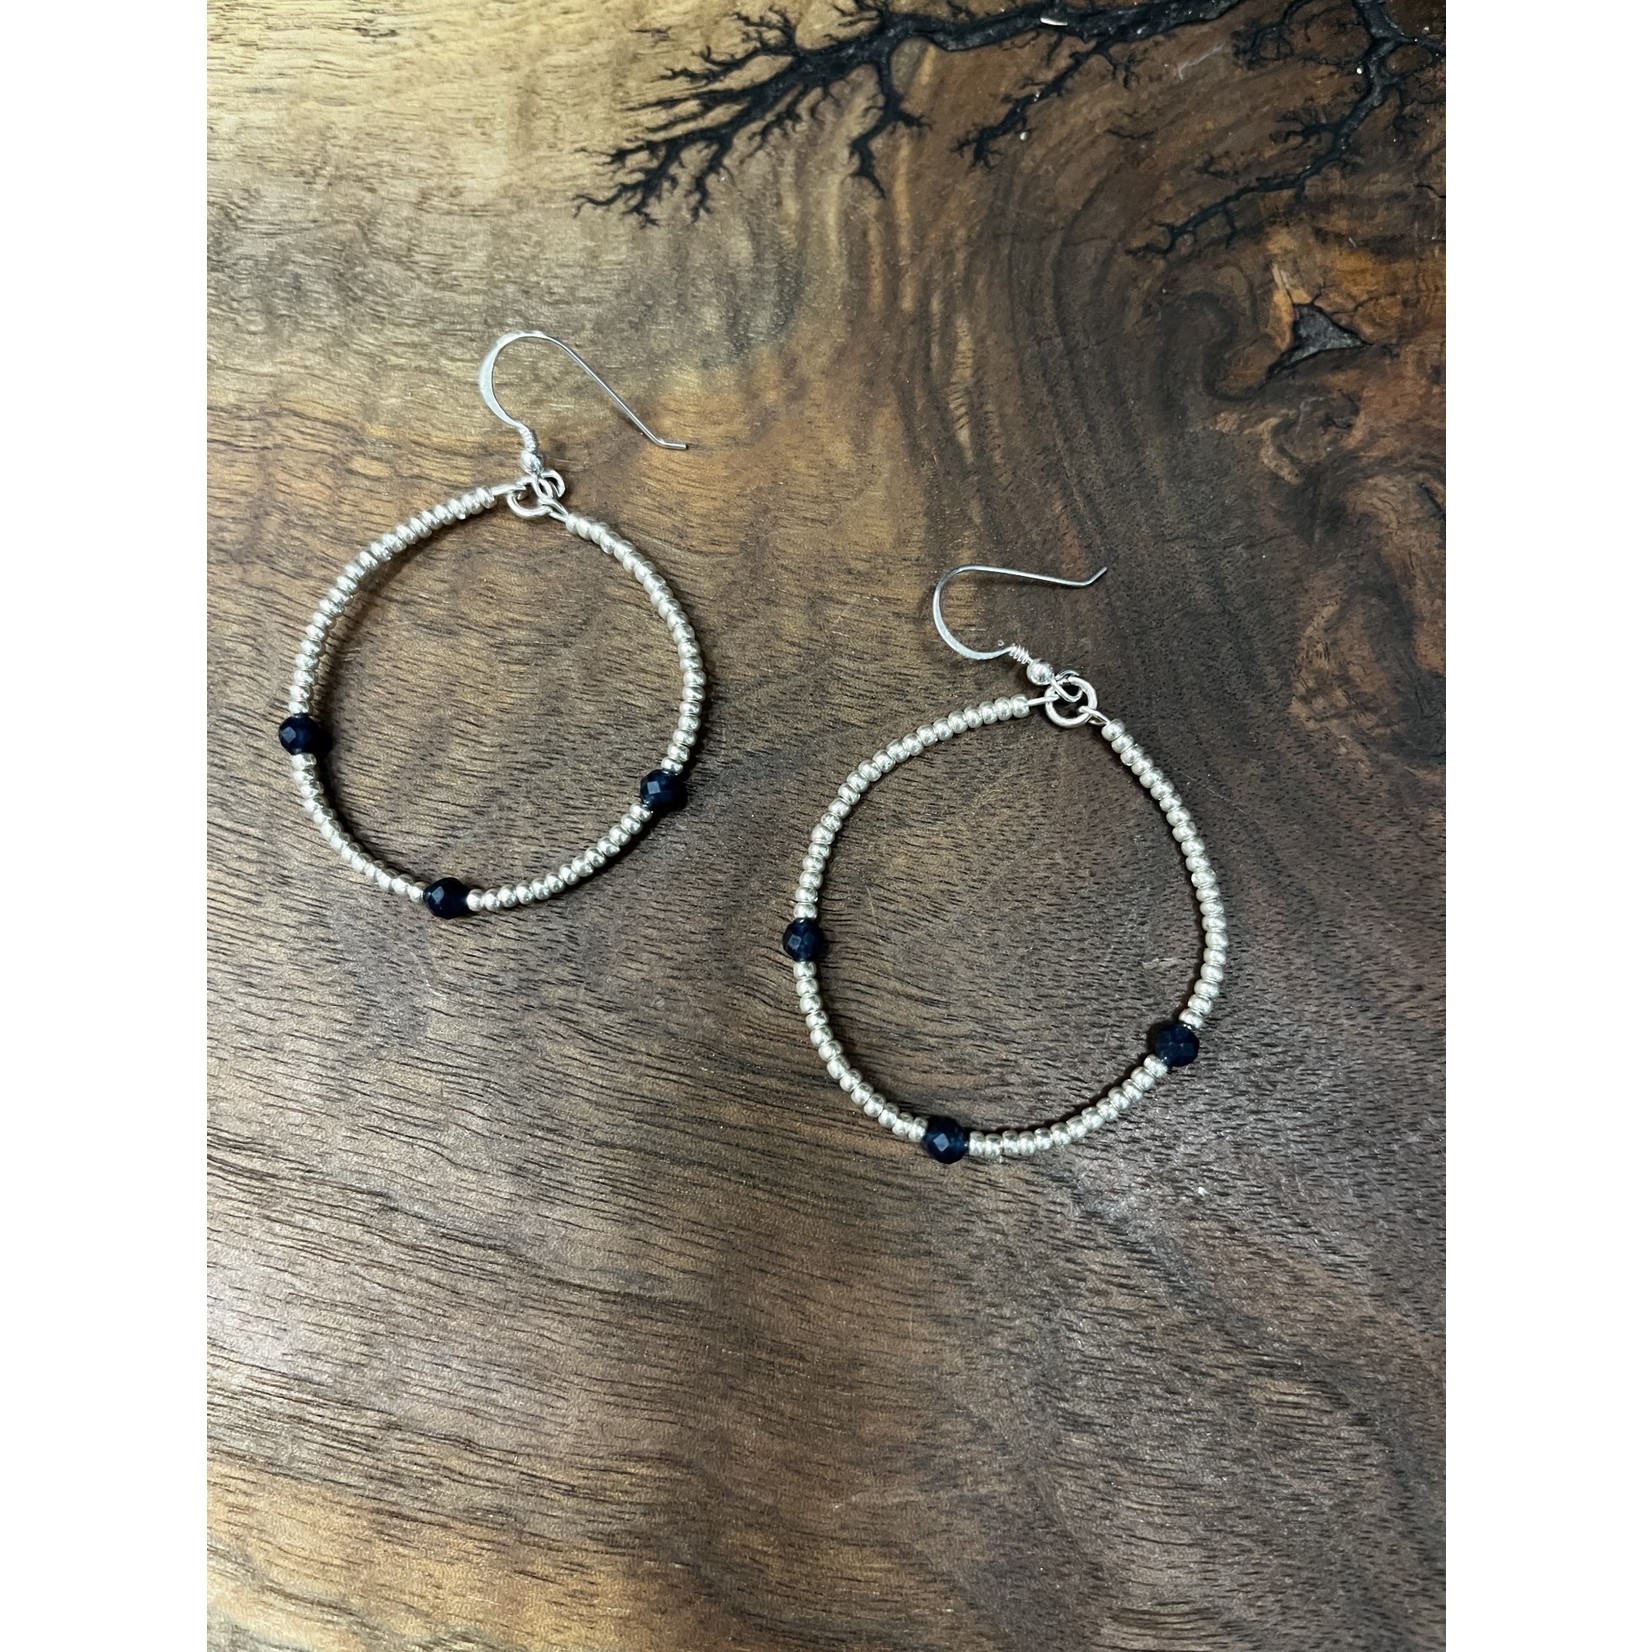 Allie Bonidy Allie B| Silver bead and natural sapphire earrings